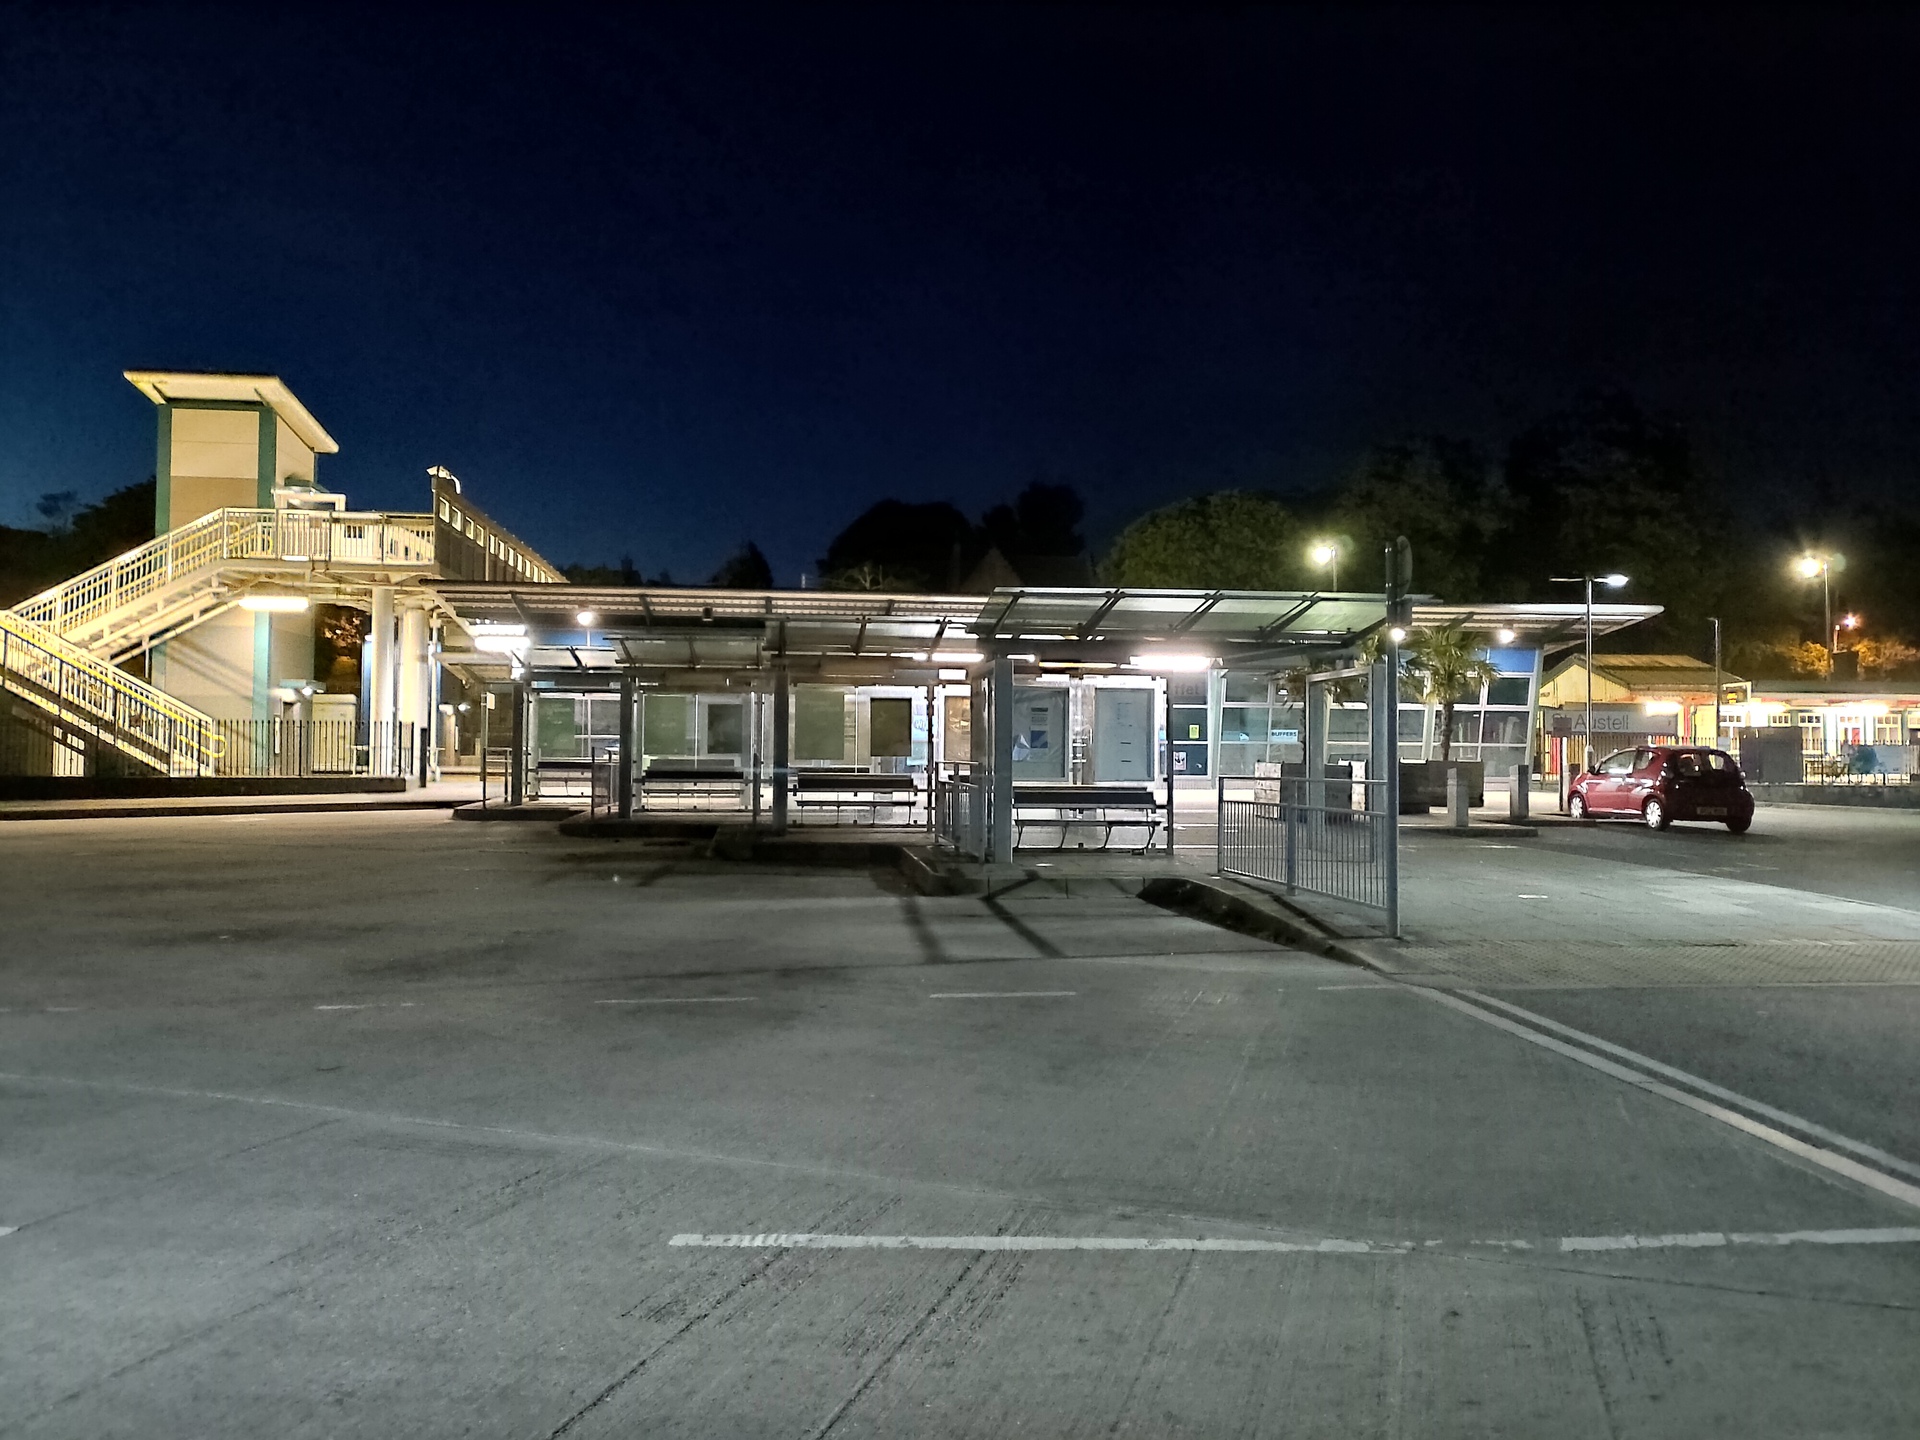 Zenfone 6 Camera - Low-light test of a train station car park at night